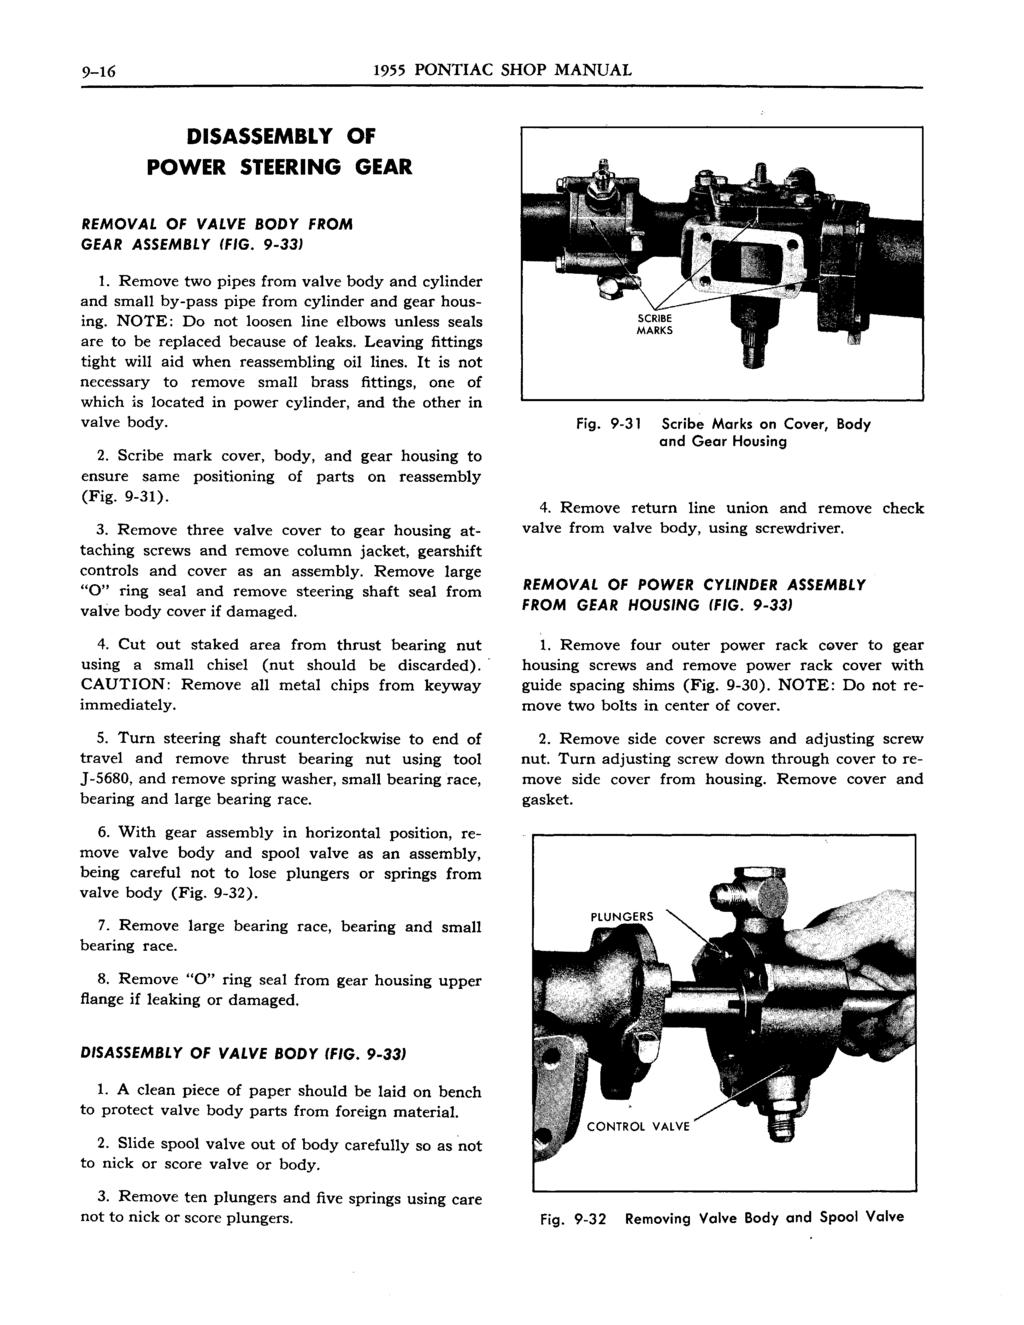 9-16 1955 PONTIAC SHOP MANUAL DISASSEMBLY OF POWER STEERING GEAR REMOVAl. Of VAl.VE BODY from GEAR ASSEMBl. Y (fig. 9-33' 1.